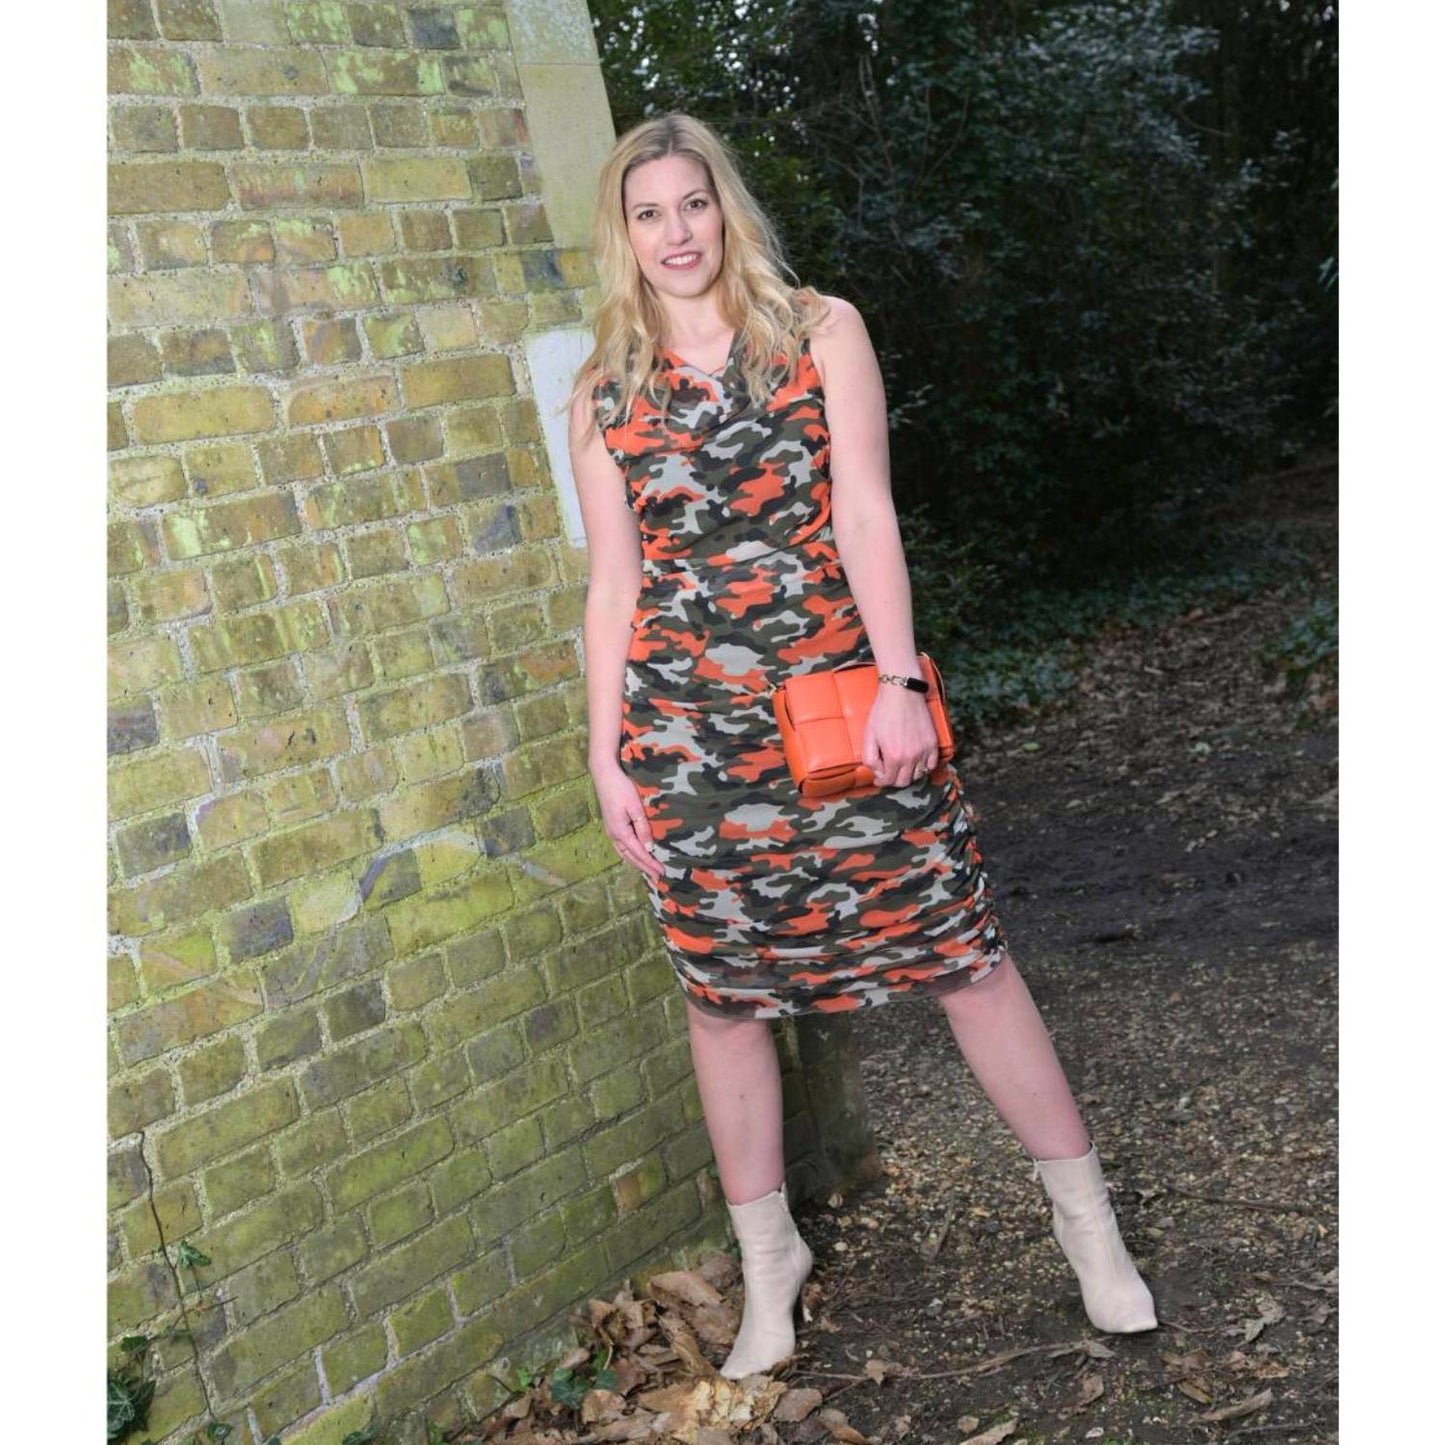 Women's Summer Mid Size Orange Green Grey Camouflage Bodycon Midi Dress styled with an orange handbag and beige boots for a modern, stylish look.